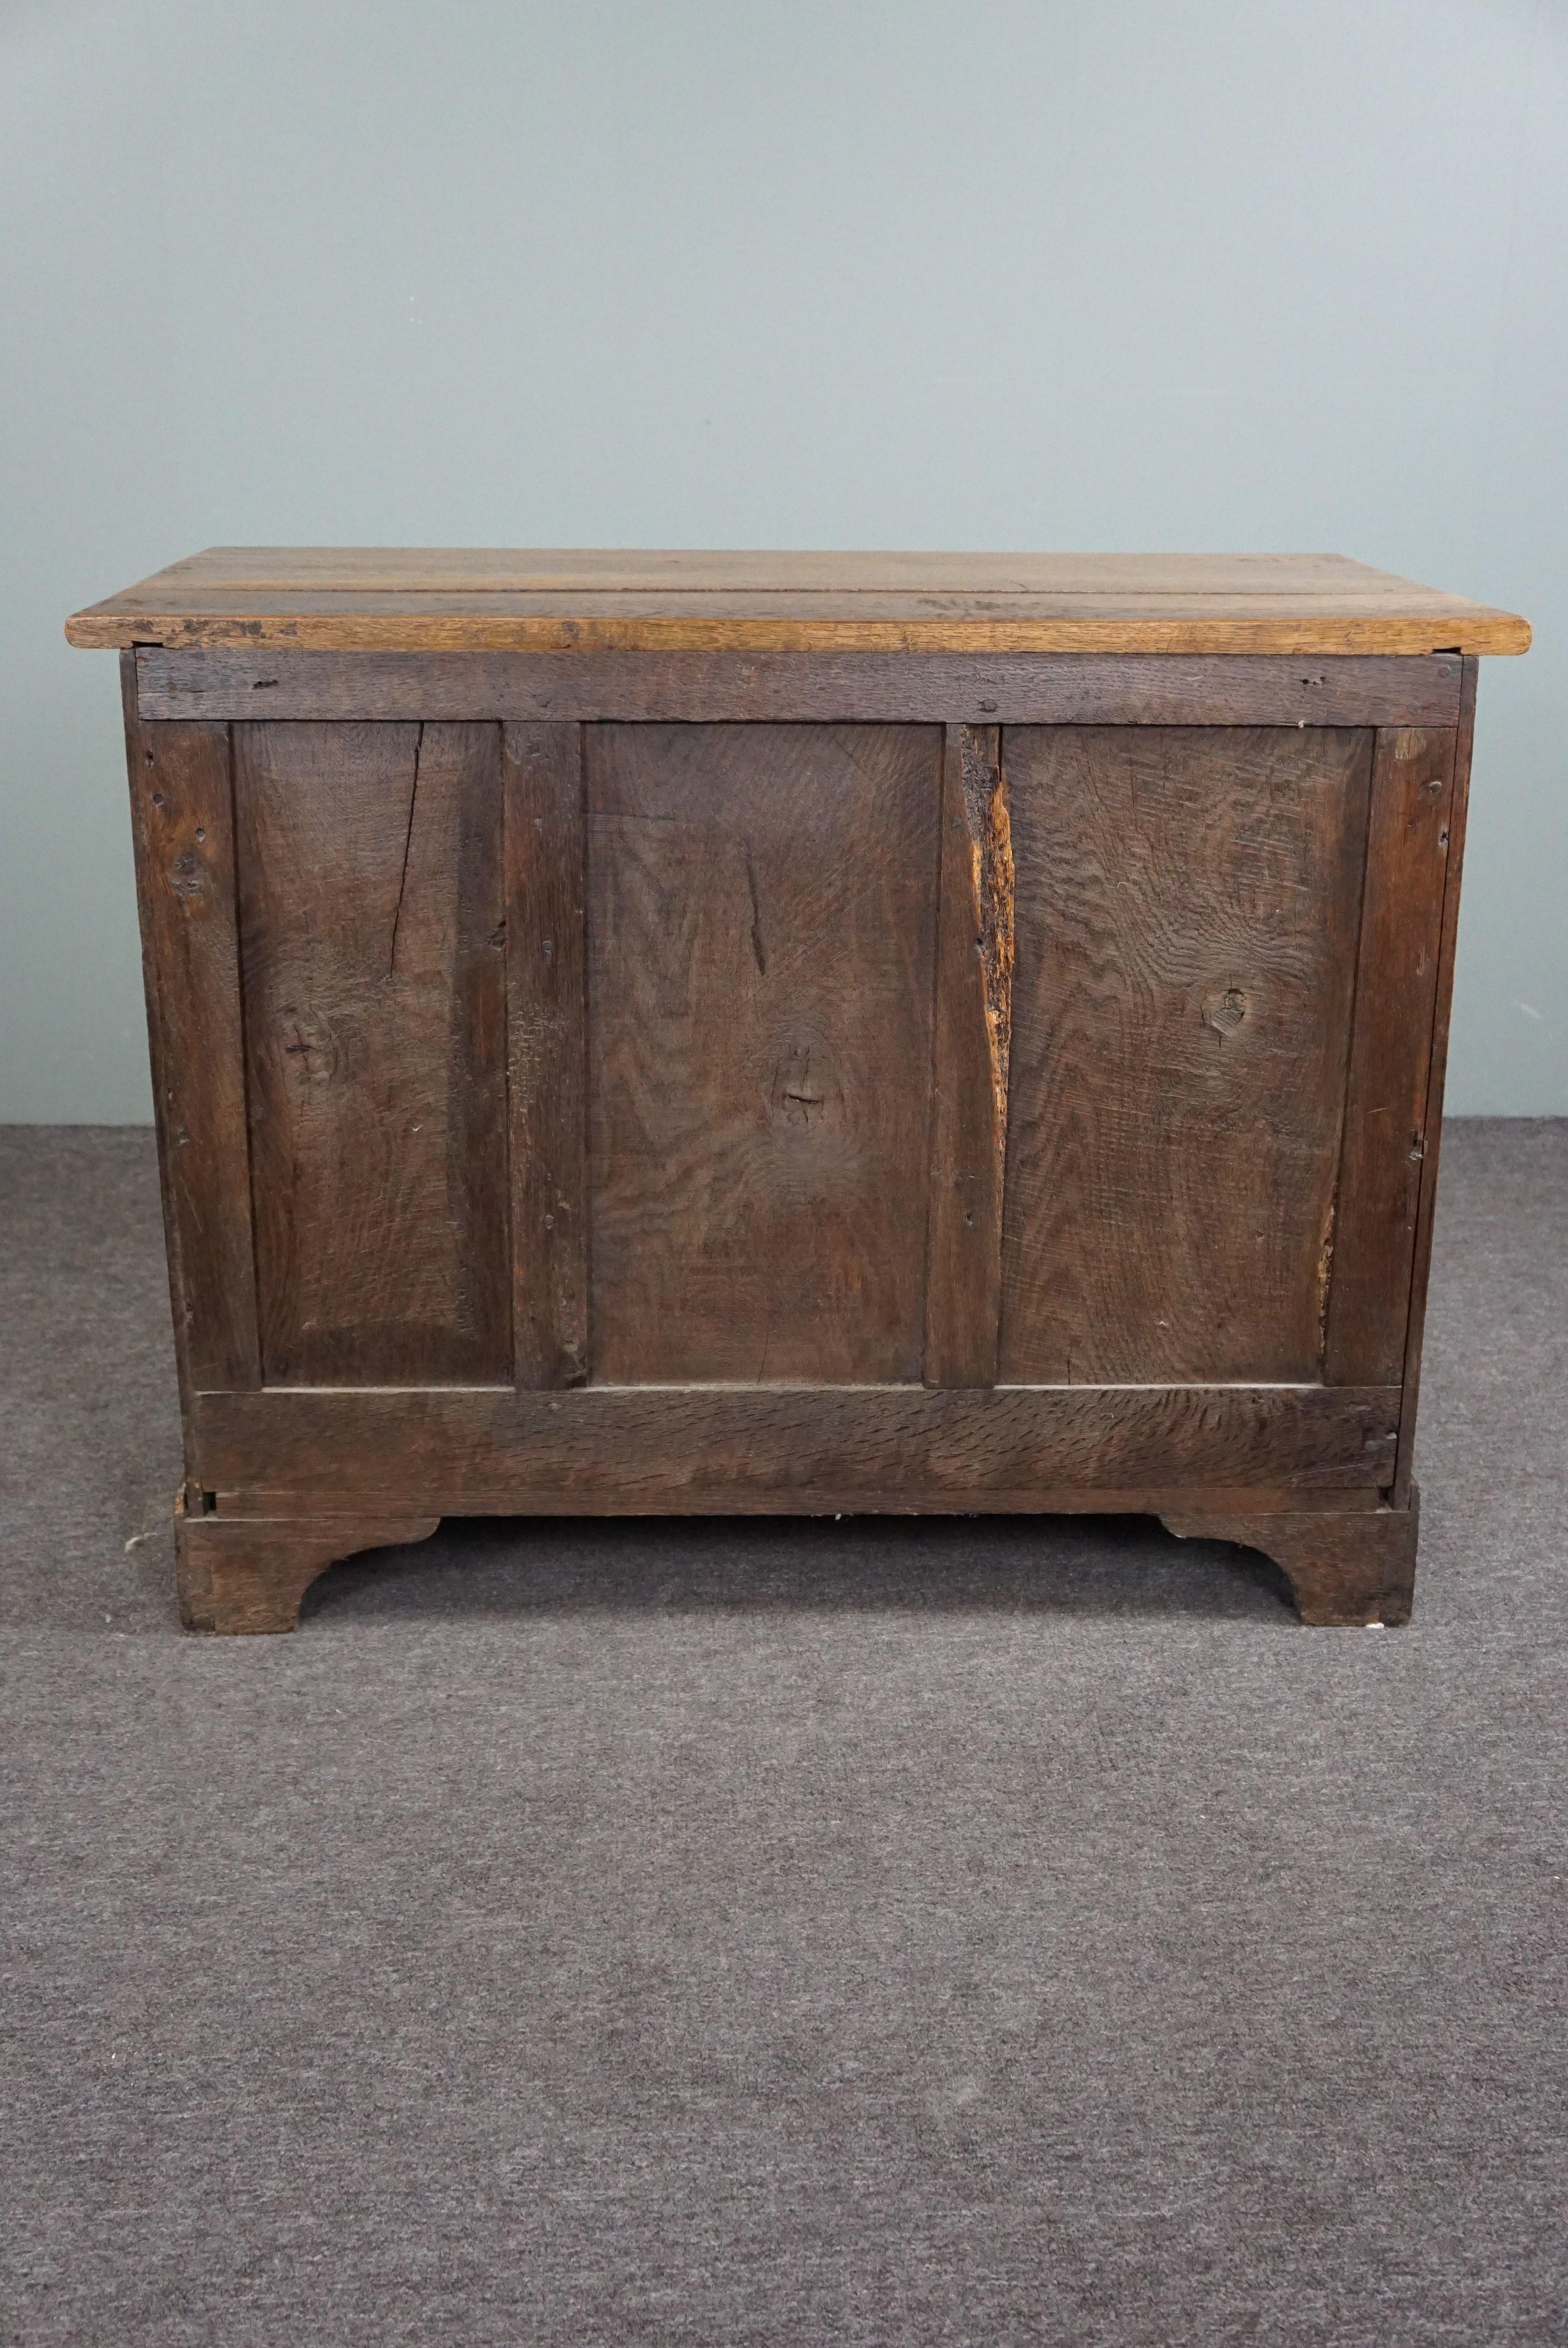 Hand-Crafted Beautiful antique oak chest of drawers with 4 drawers and a striking appearance For Sale